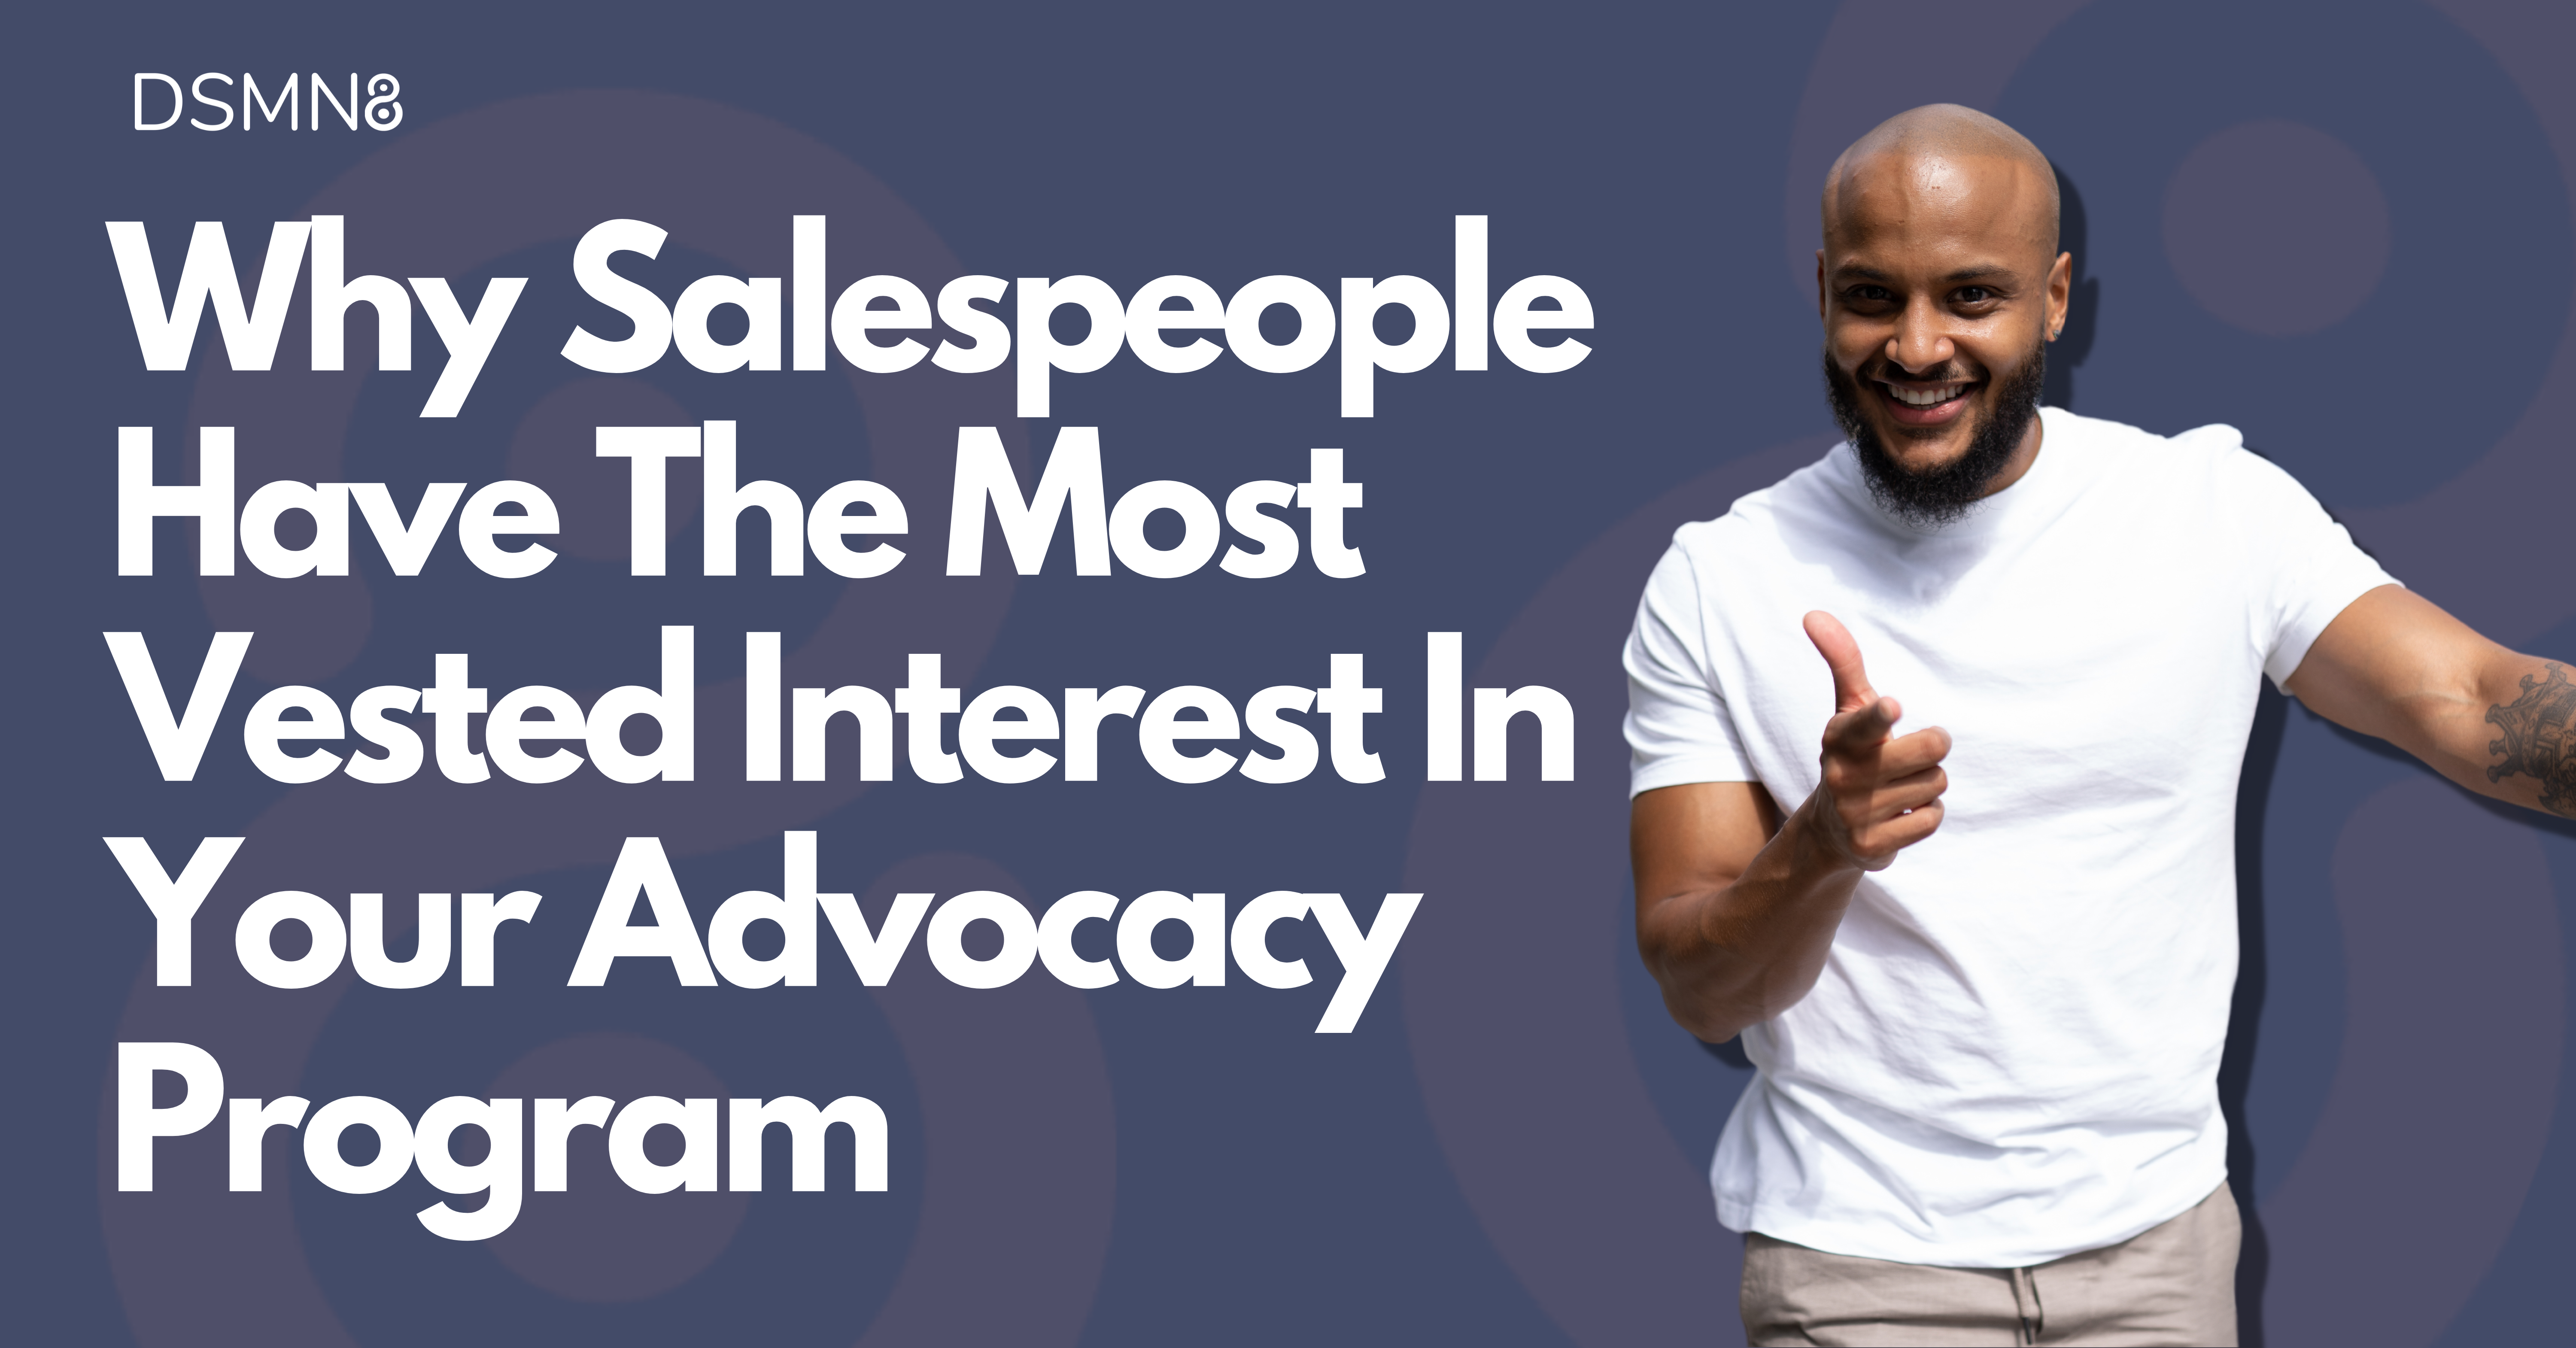 Why Salespeople Have The Most Vested Interest In Your Advocacy Program Blog | DSMN8